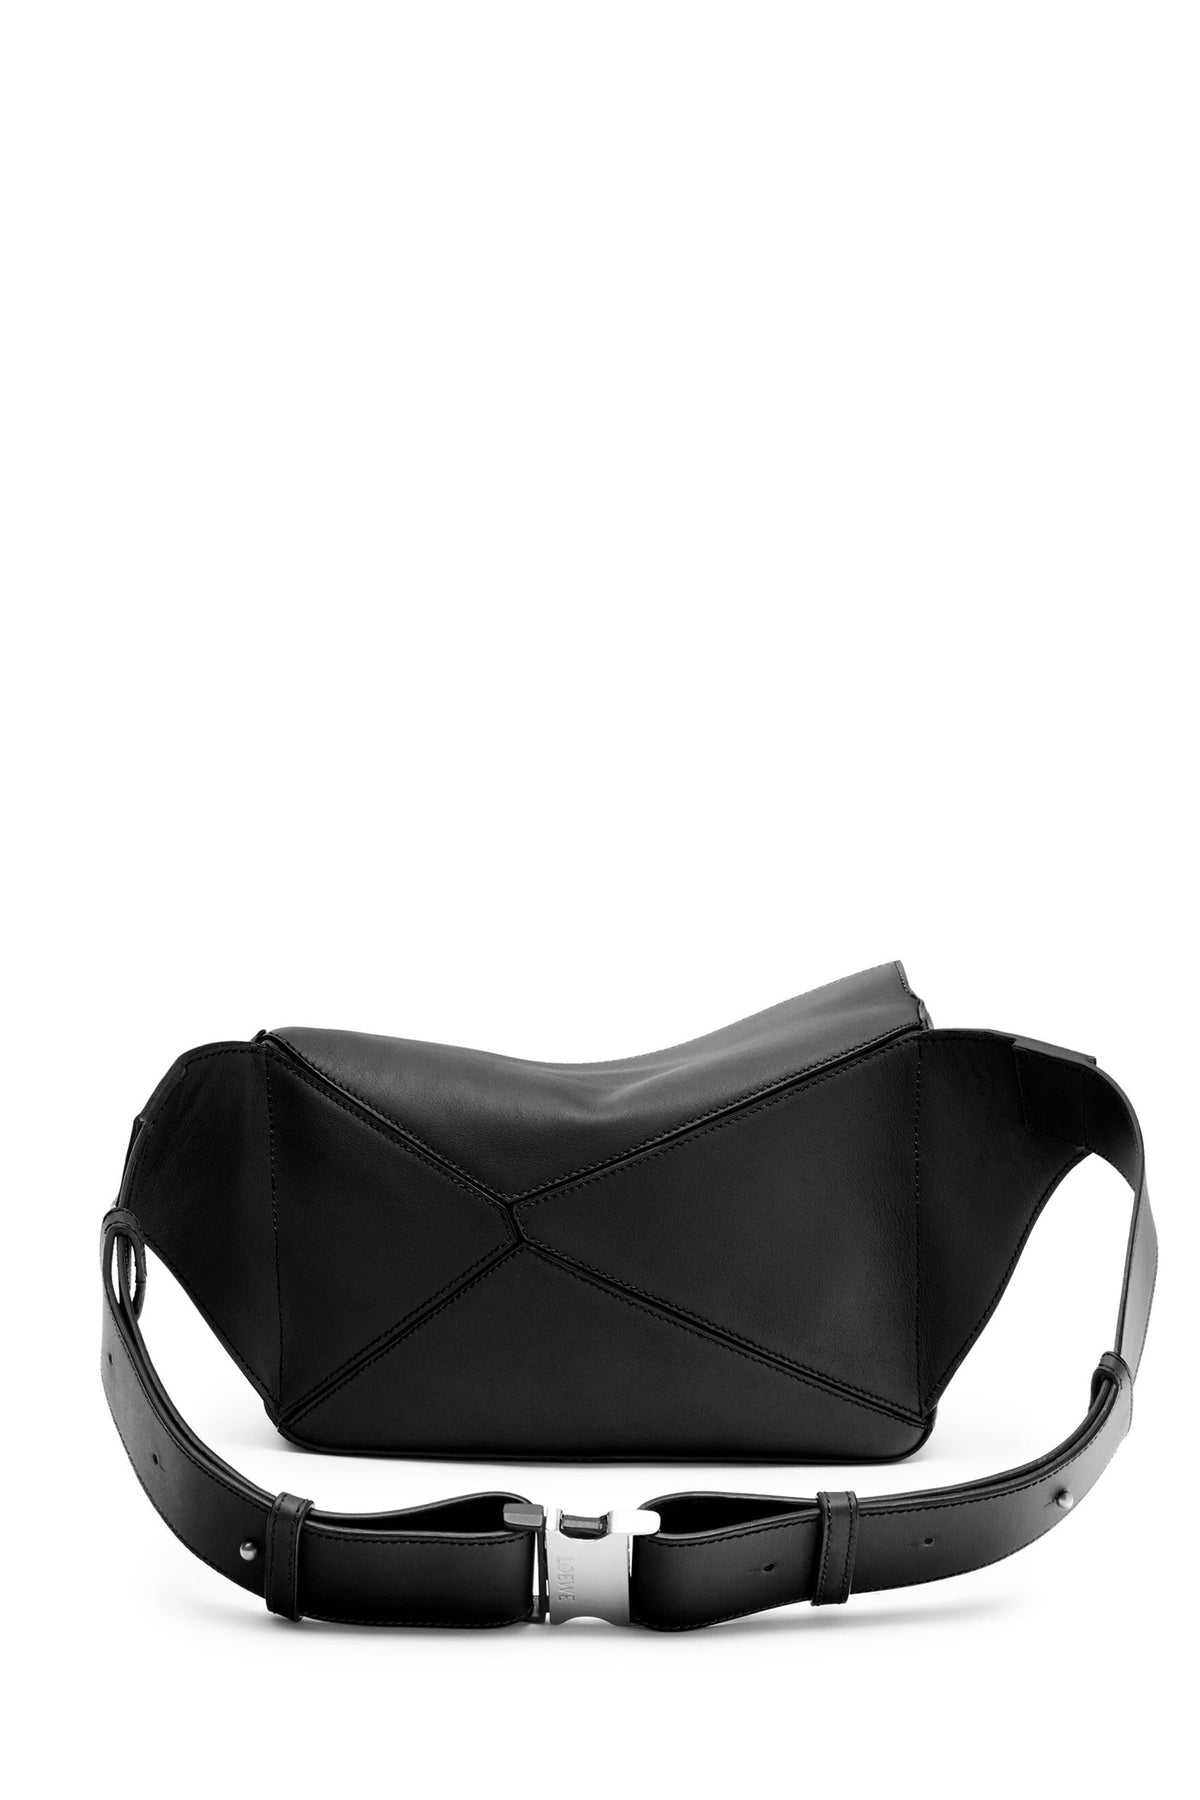 PUZZLE SMALL BUMBAG / BLK